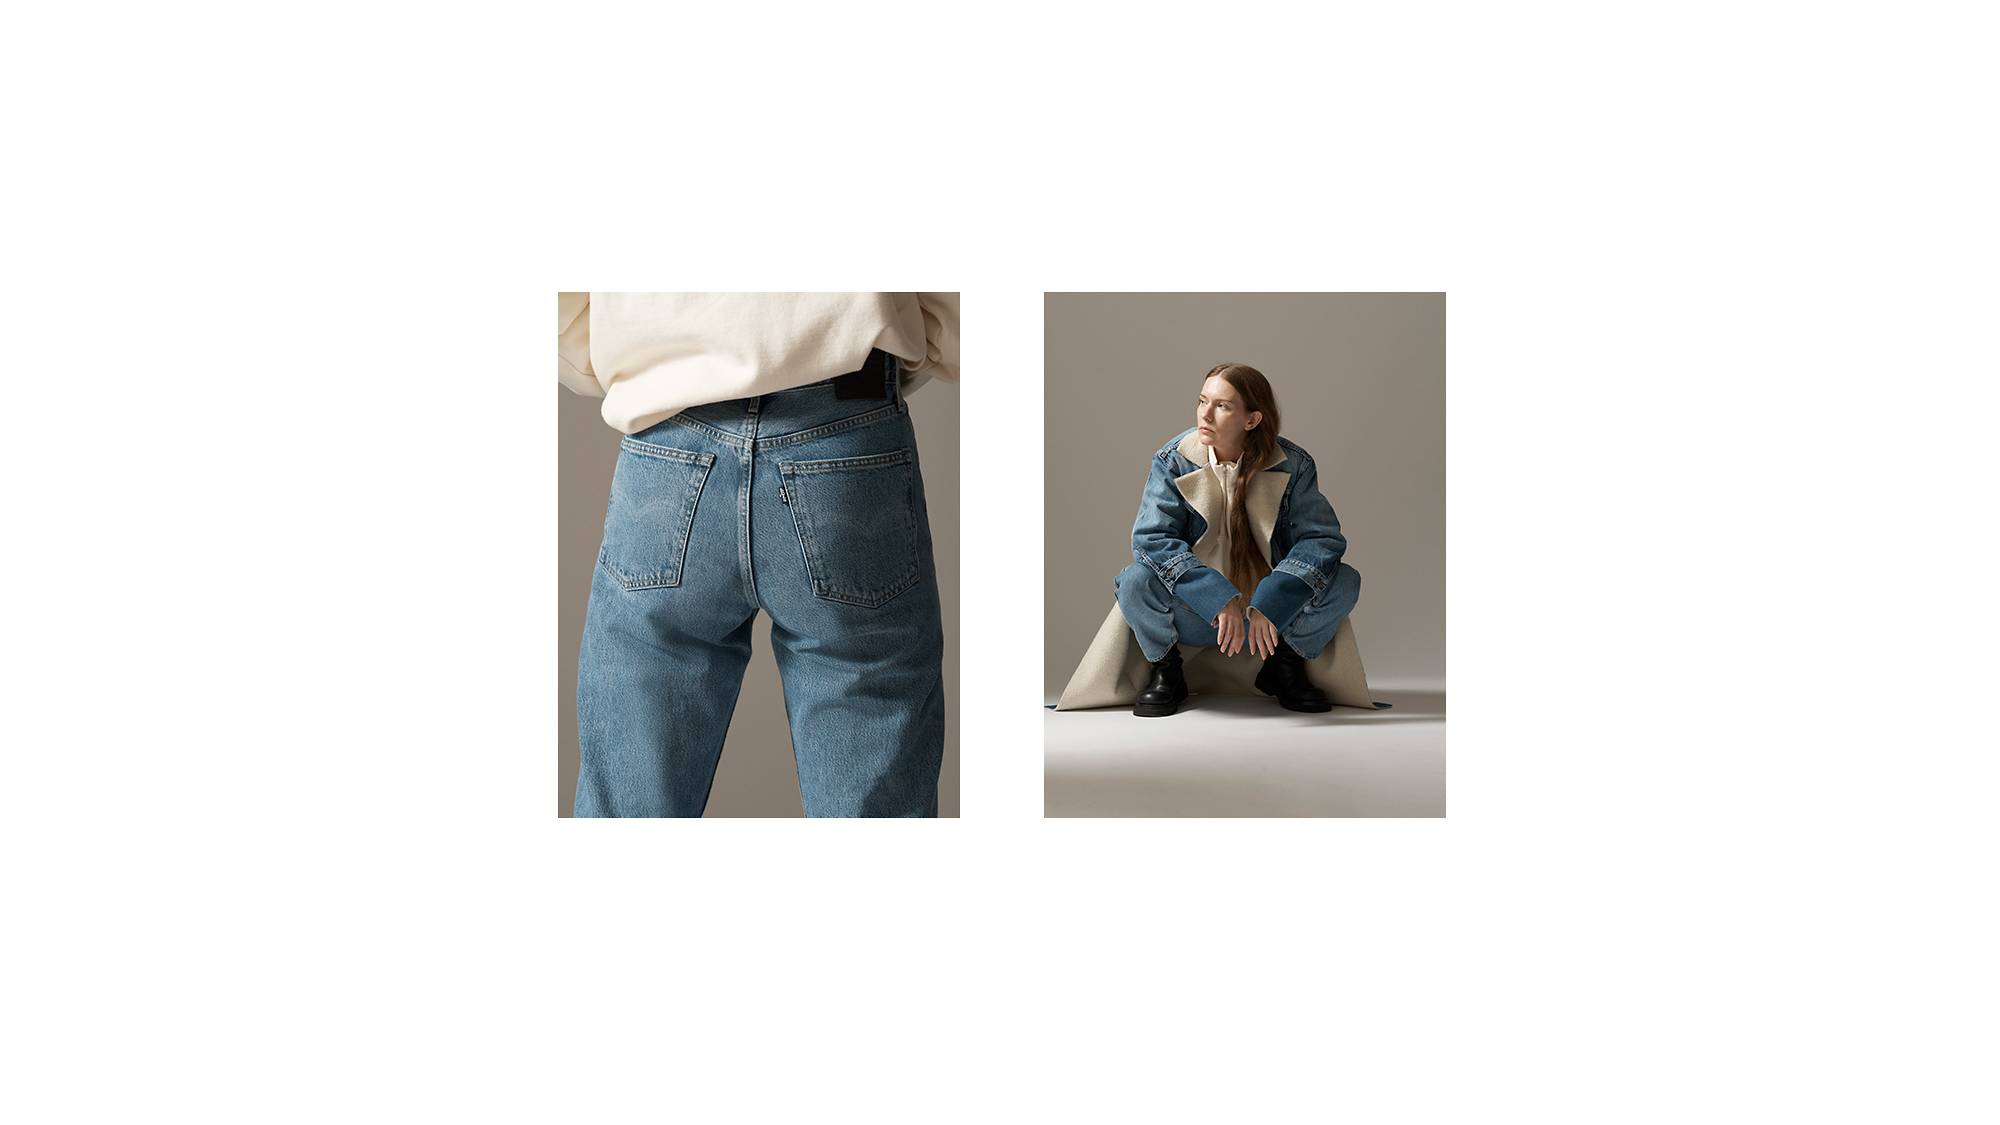 A collage of an image of the back pockets of jeans and an image of a woman crouching down wearing a long denim sherpa jacket, jeans, and a white zip up.